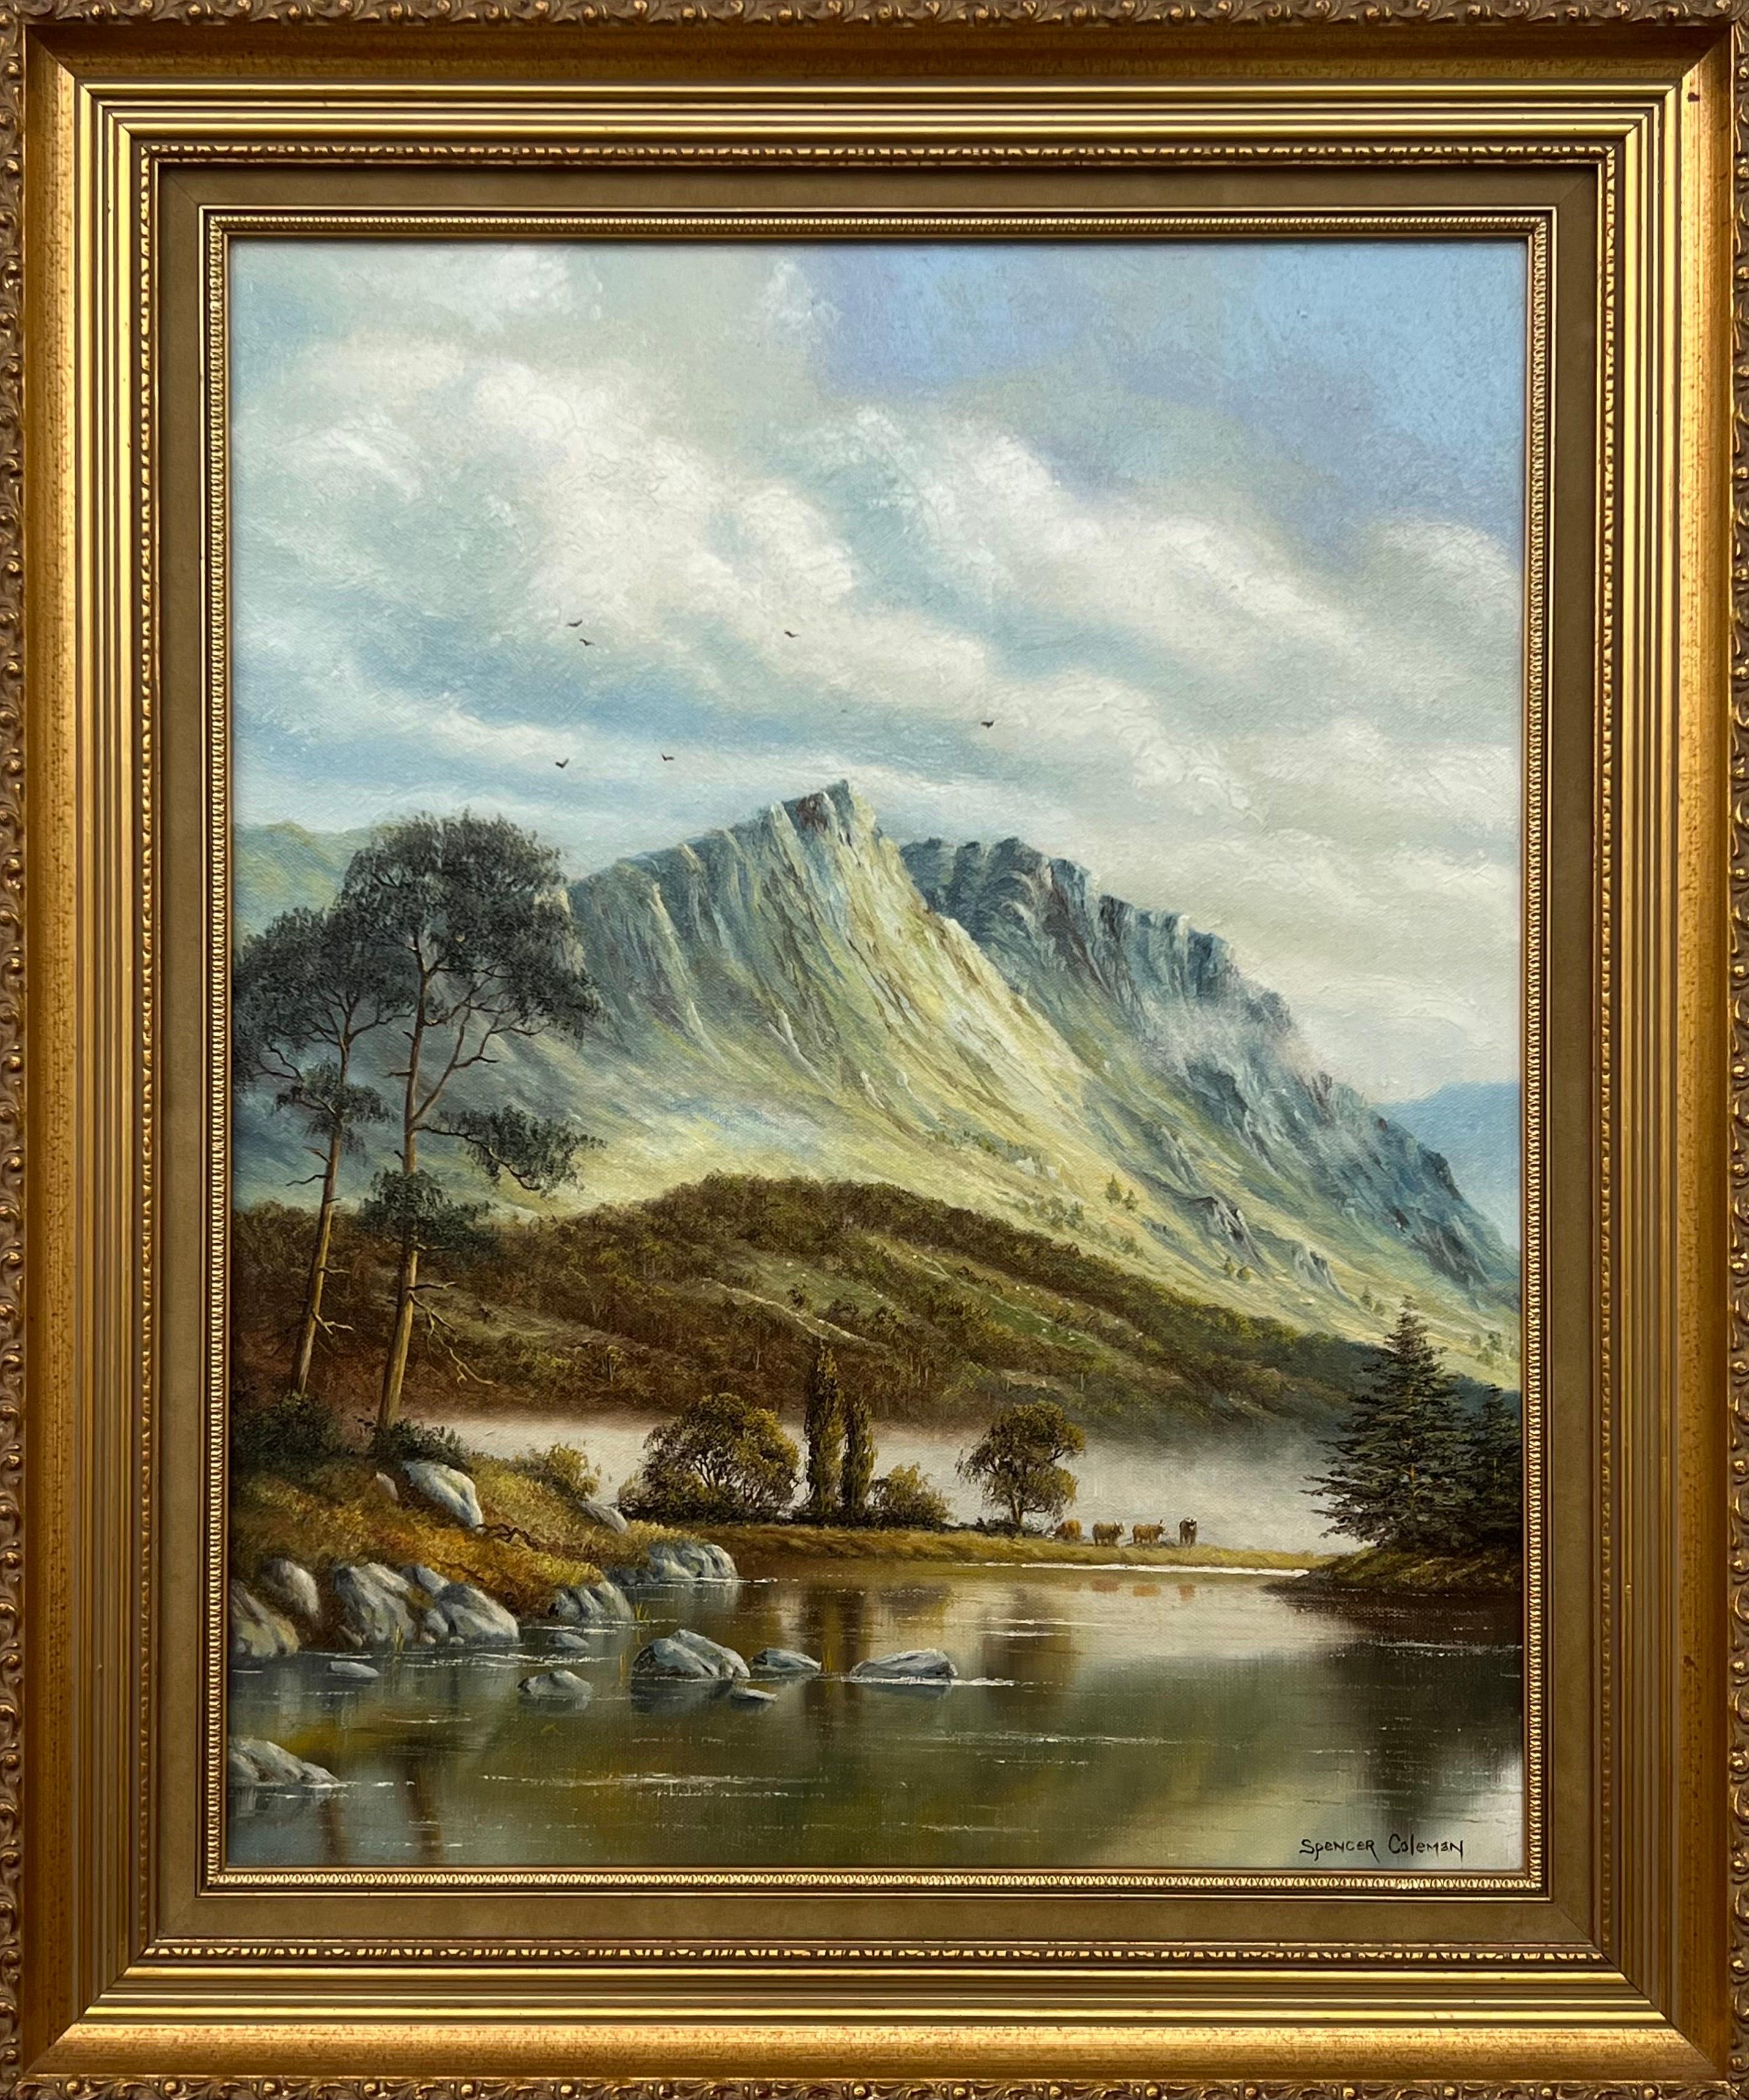 Oil Painting of Mountain Countryside Scene with Lake, Birds & Cattle in England